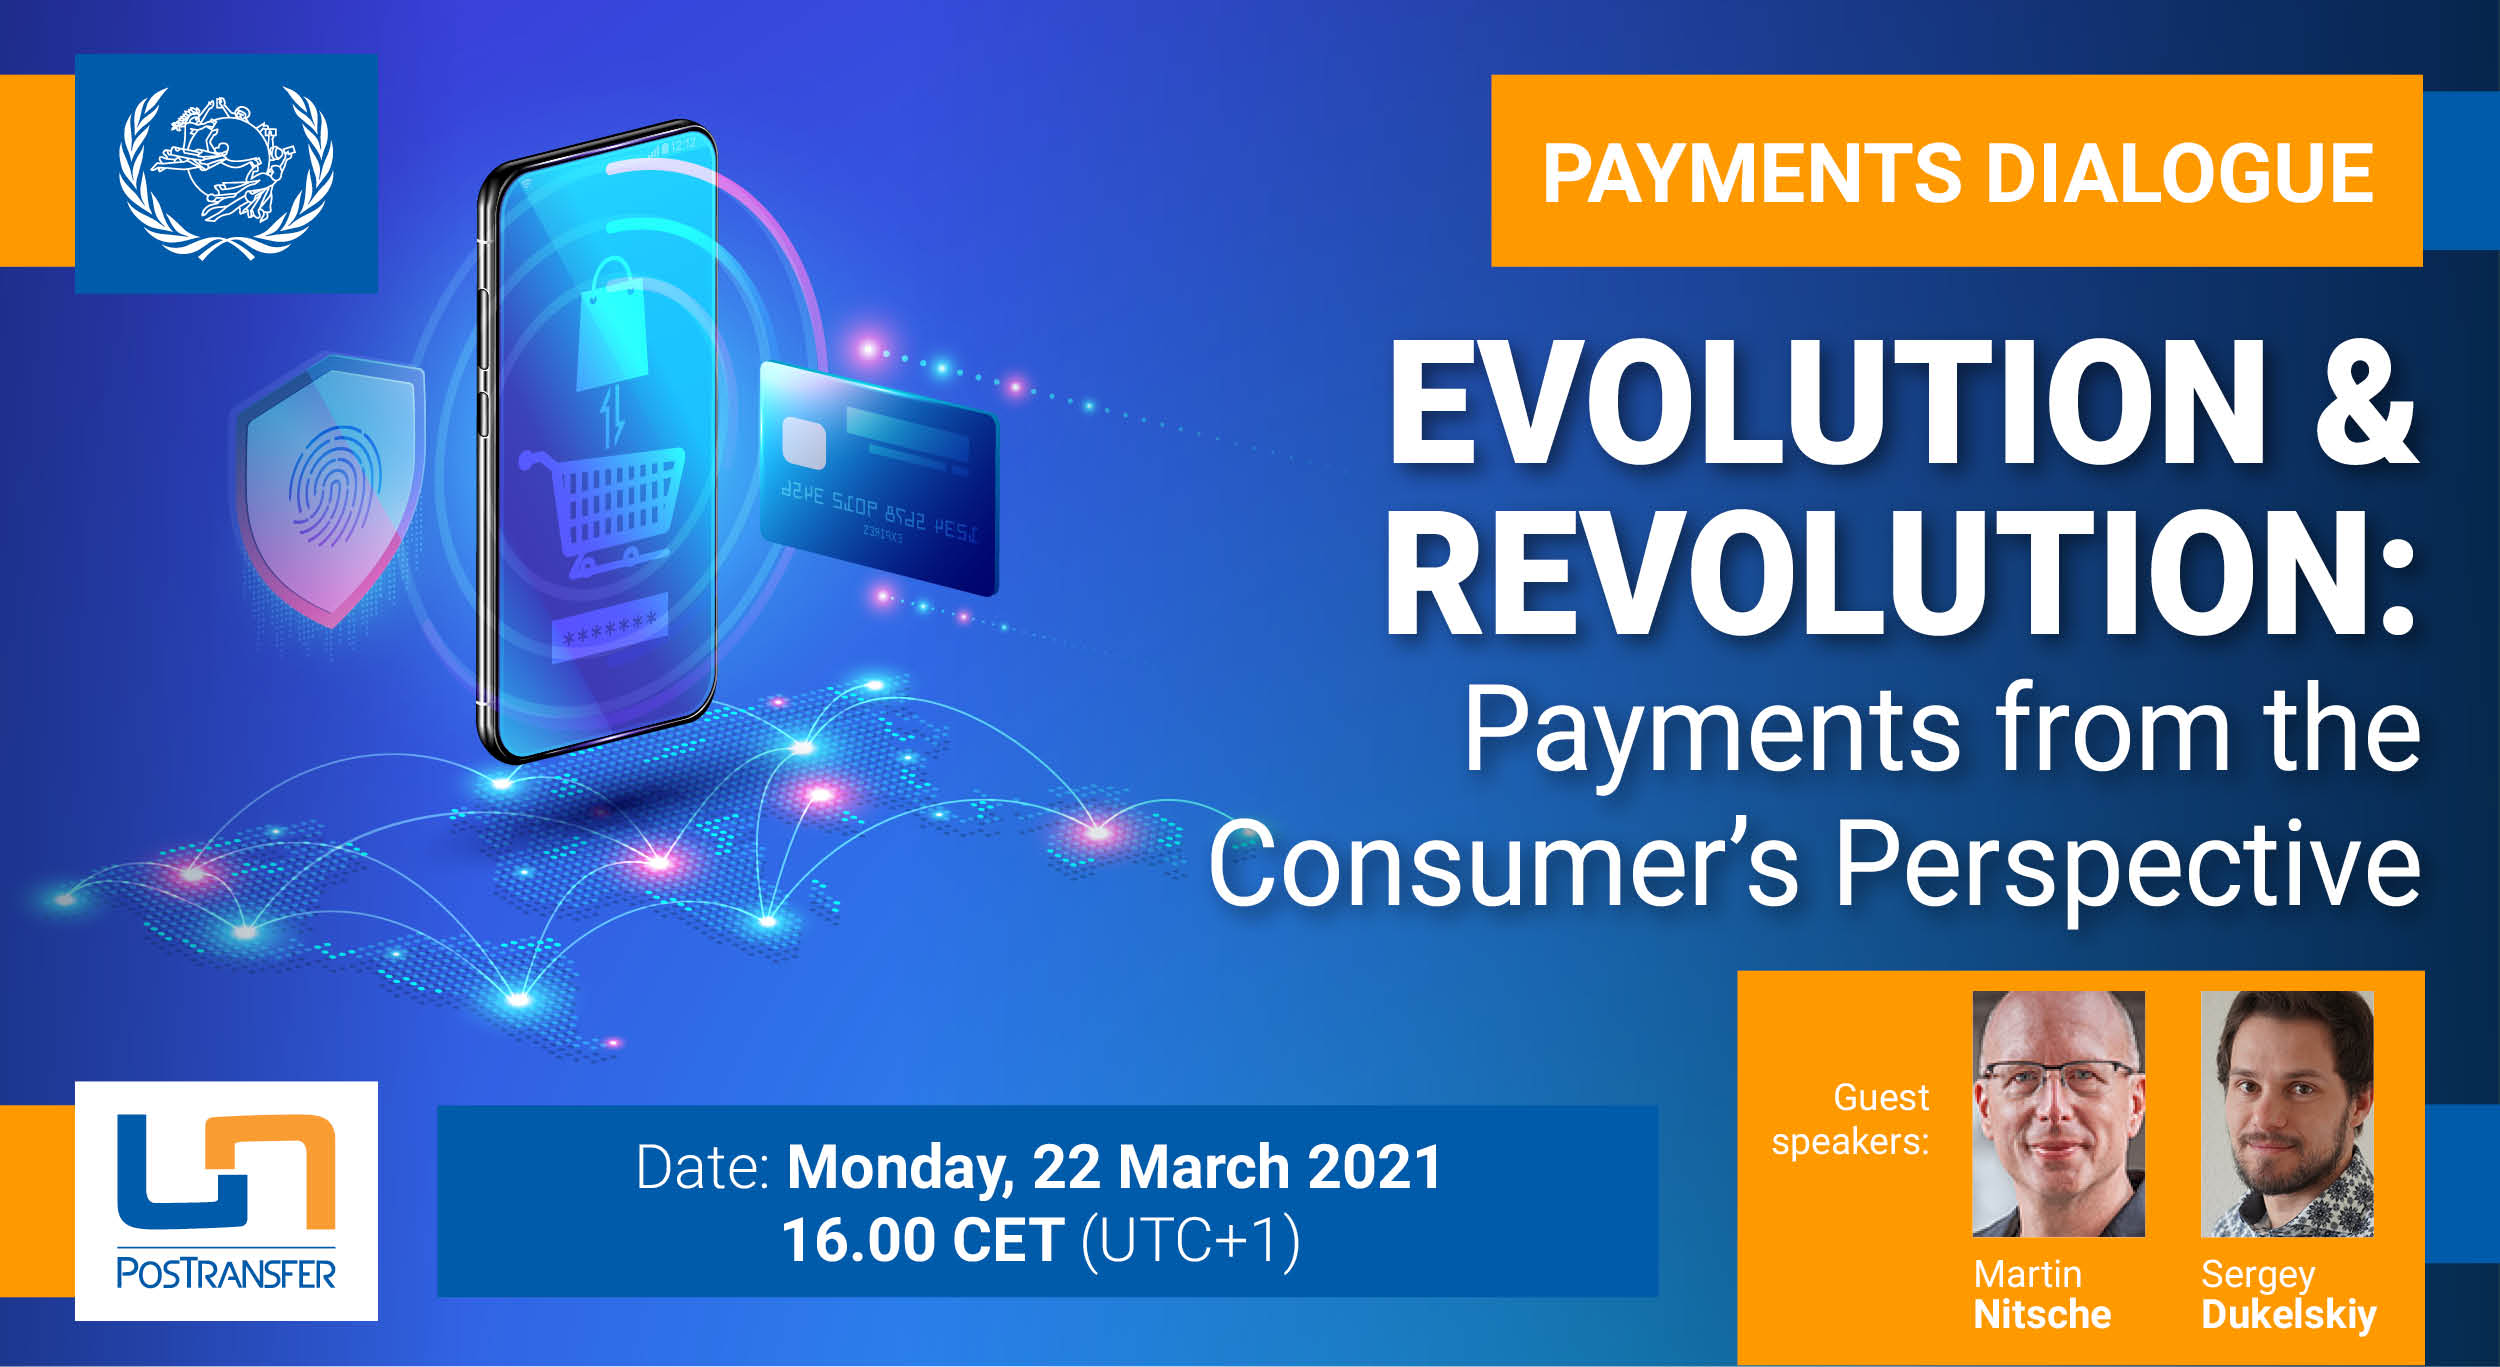 Evolution and revolution: payments from the consumer's perspective